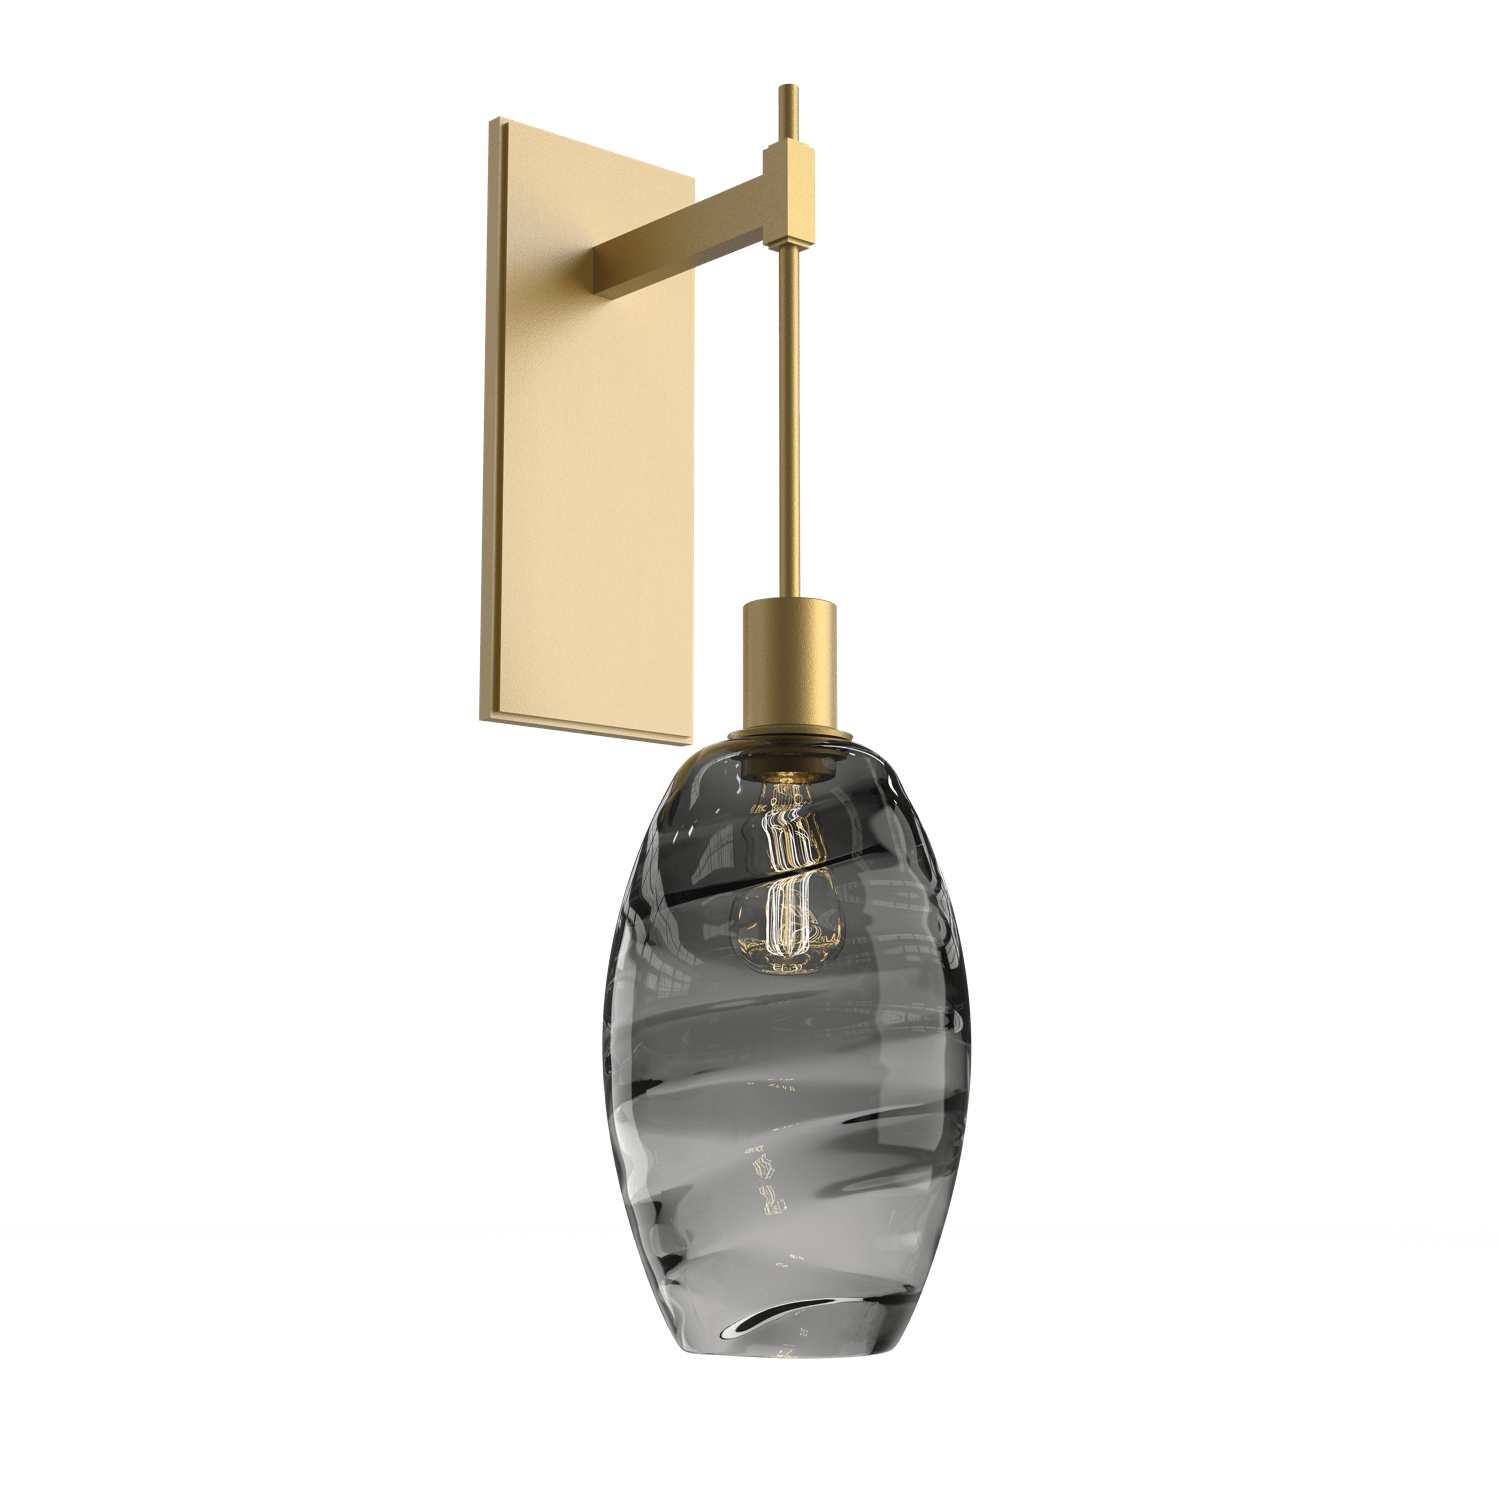 IDB0035-24-GB-OS-Hammerton-Studio-Optic-Blown-Glass-Elisse-tempo-wall-sconce-with-gilded-brass-finish-and-optic-smoke-blown-glass-shades-and-incandescent-lamping